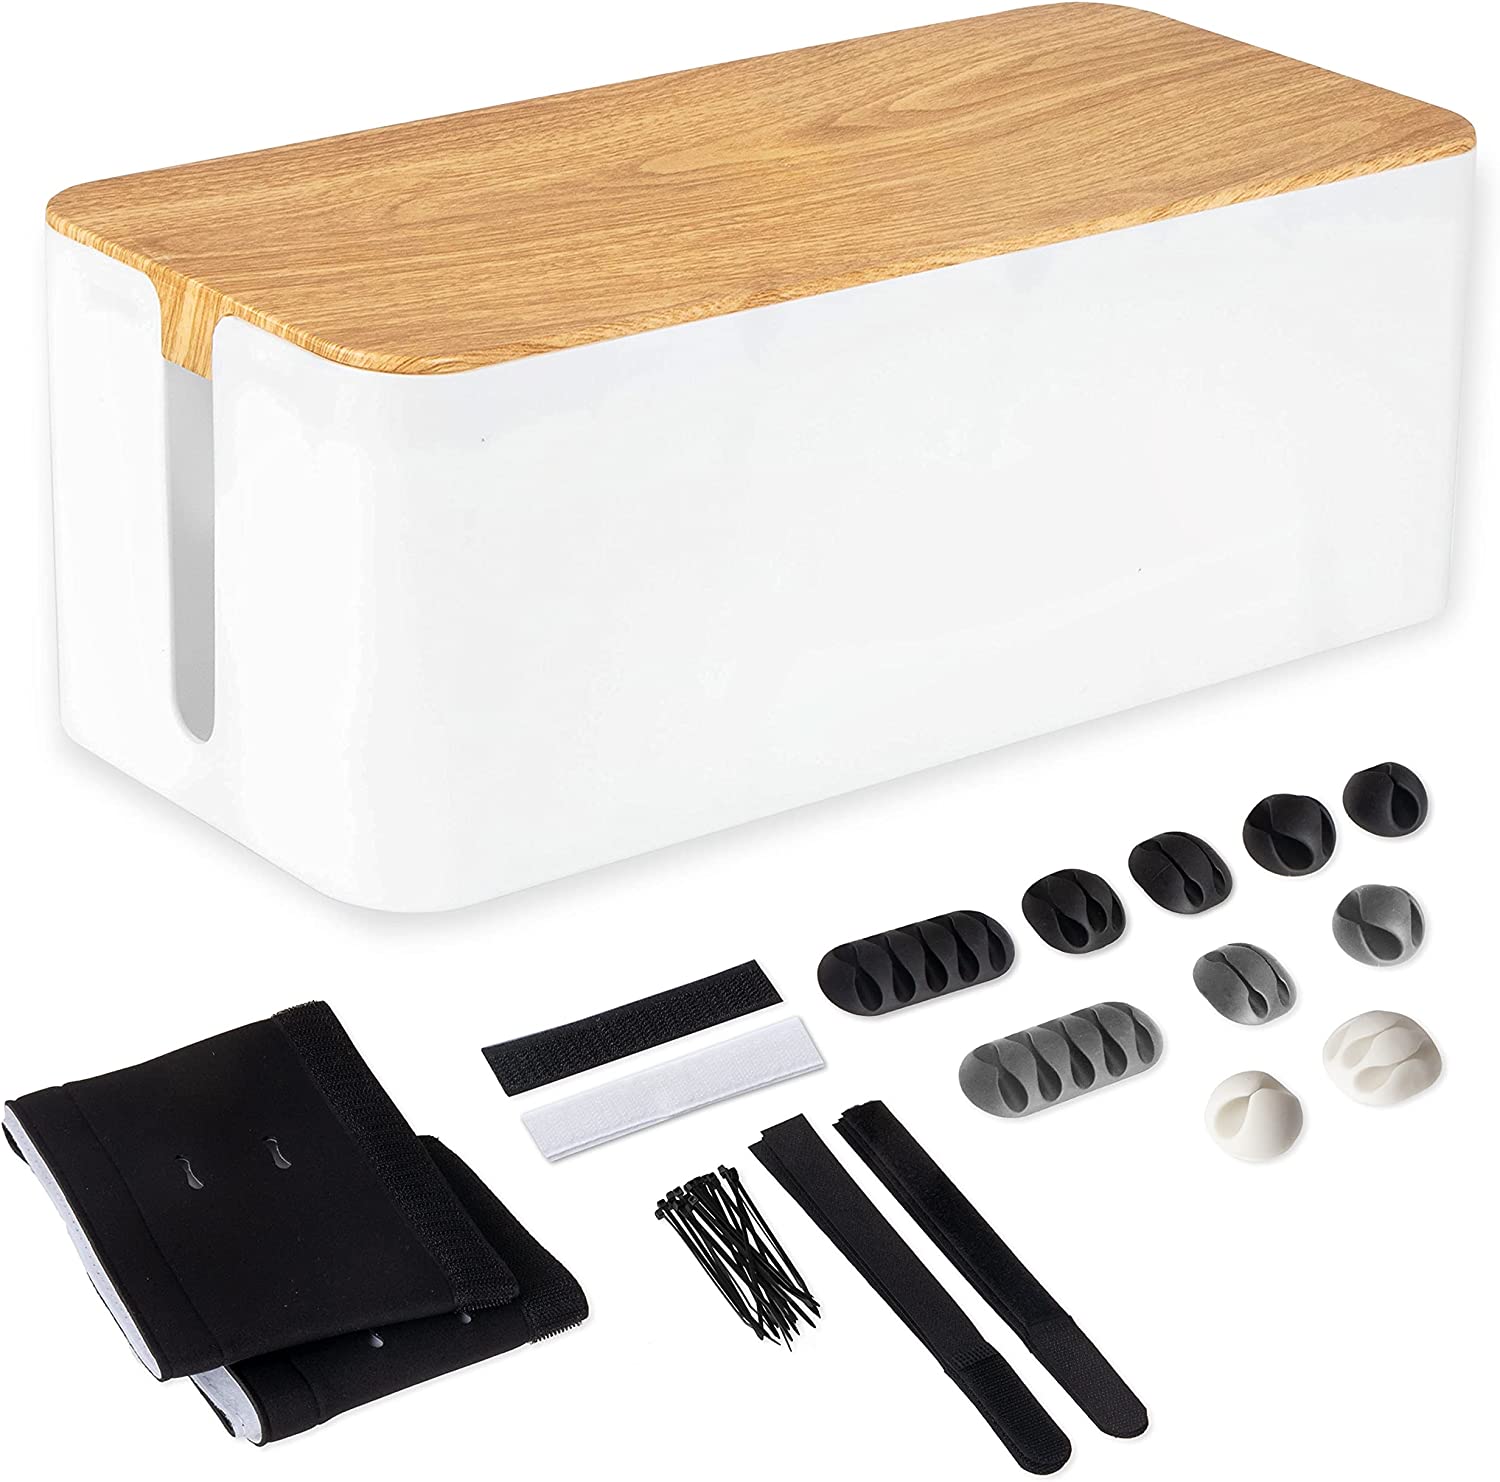 Cable Management Box - Cord Organizer for Wires, Power Strips - with Cable Sleeve, Hook and Loop Strap, Zip Ties, Clips - White Plastic, Wood Top